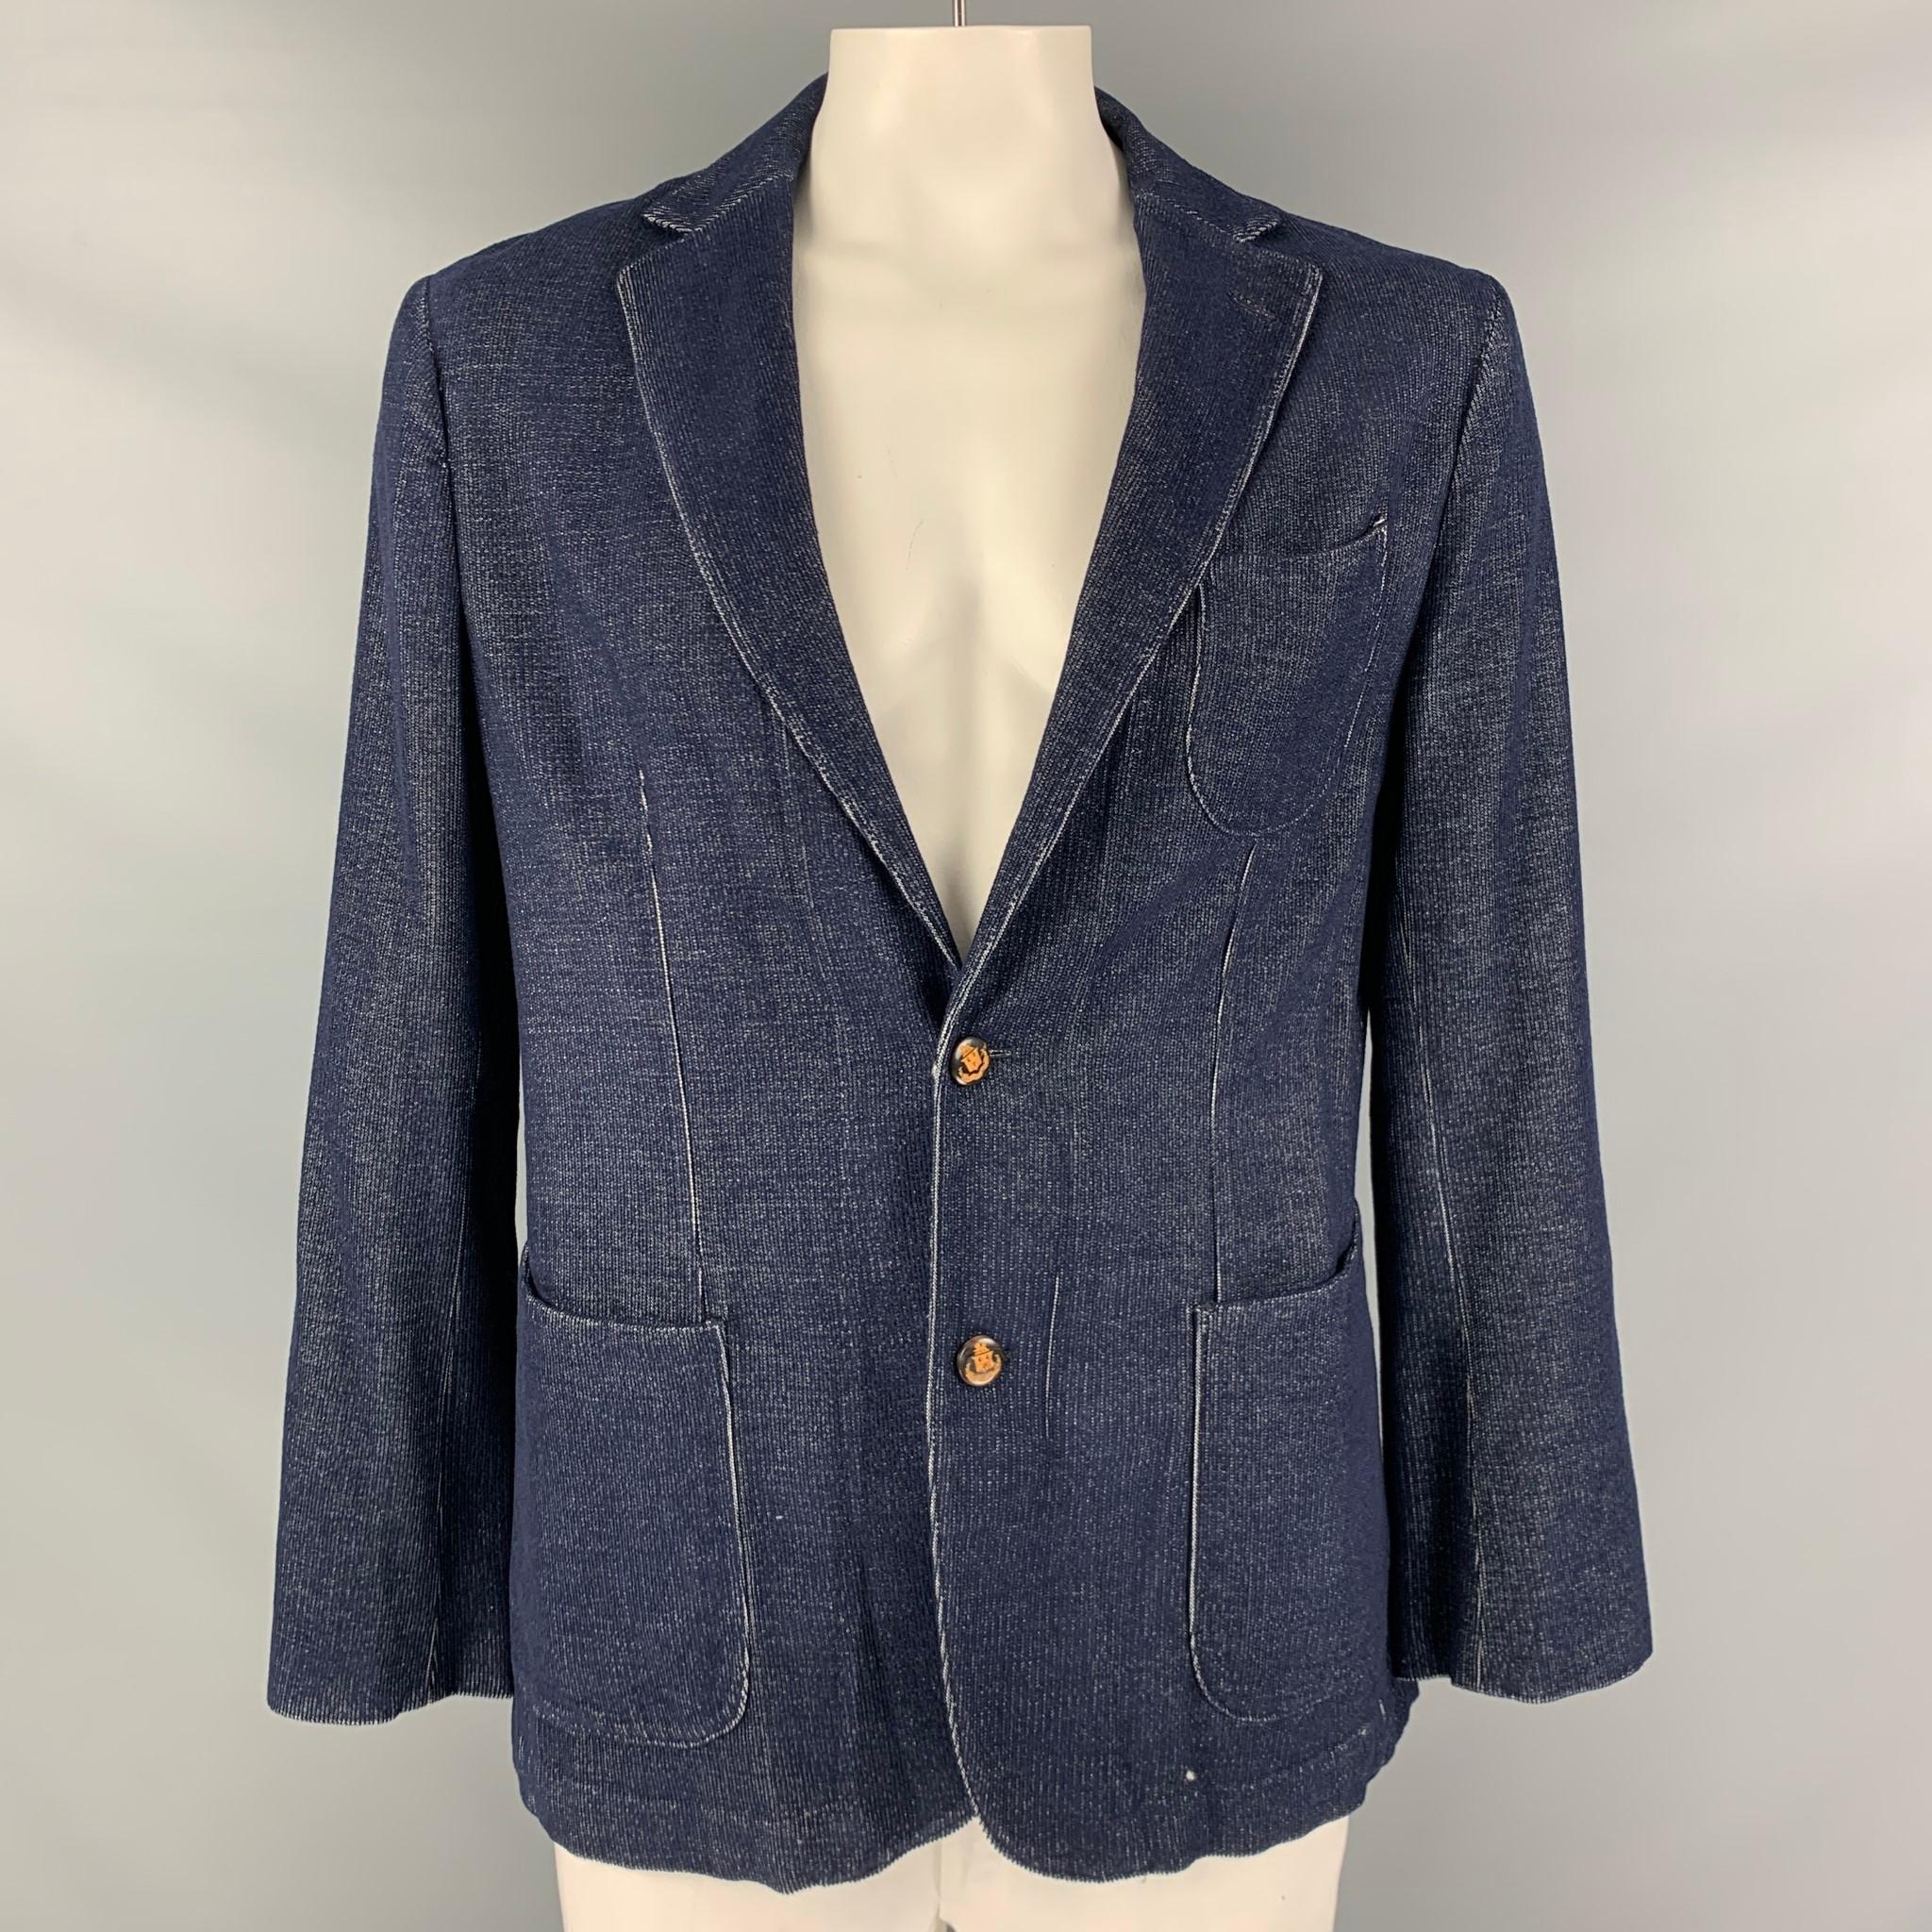 ROBERT TALBOTT jacket comes in a navy and white cashmere corduroy with a single breasted, unlined, and two button sport coat with a notch lapel.

Excellent Pre-Owned Condition.
Marked: L

Measurements:

Shoulder: 18 in.
Chest: 48 in.
Sleeve: 25.5